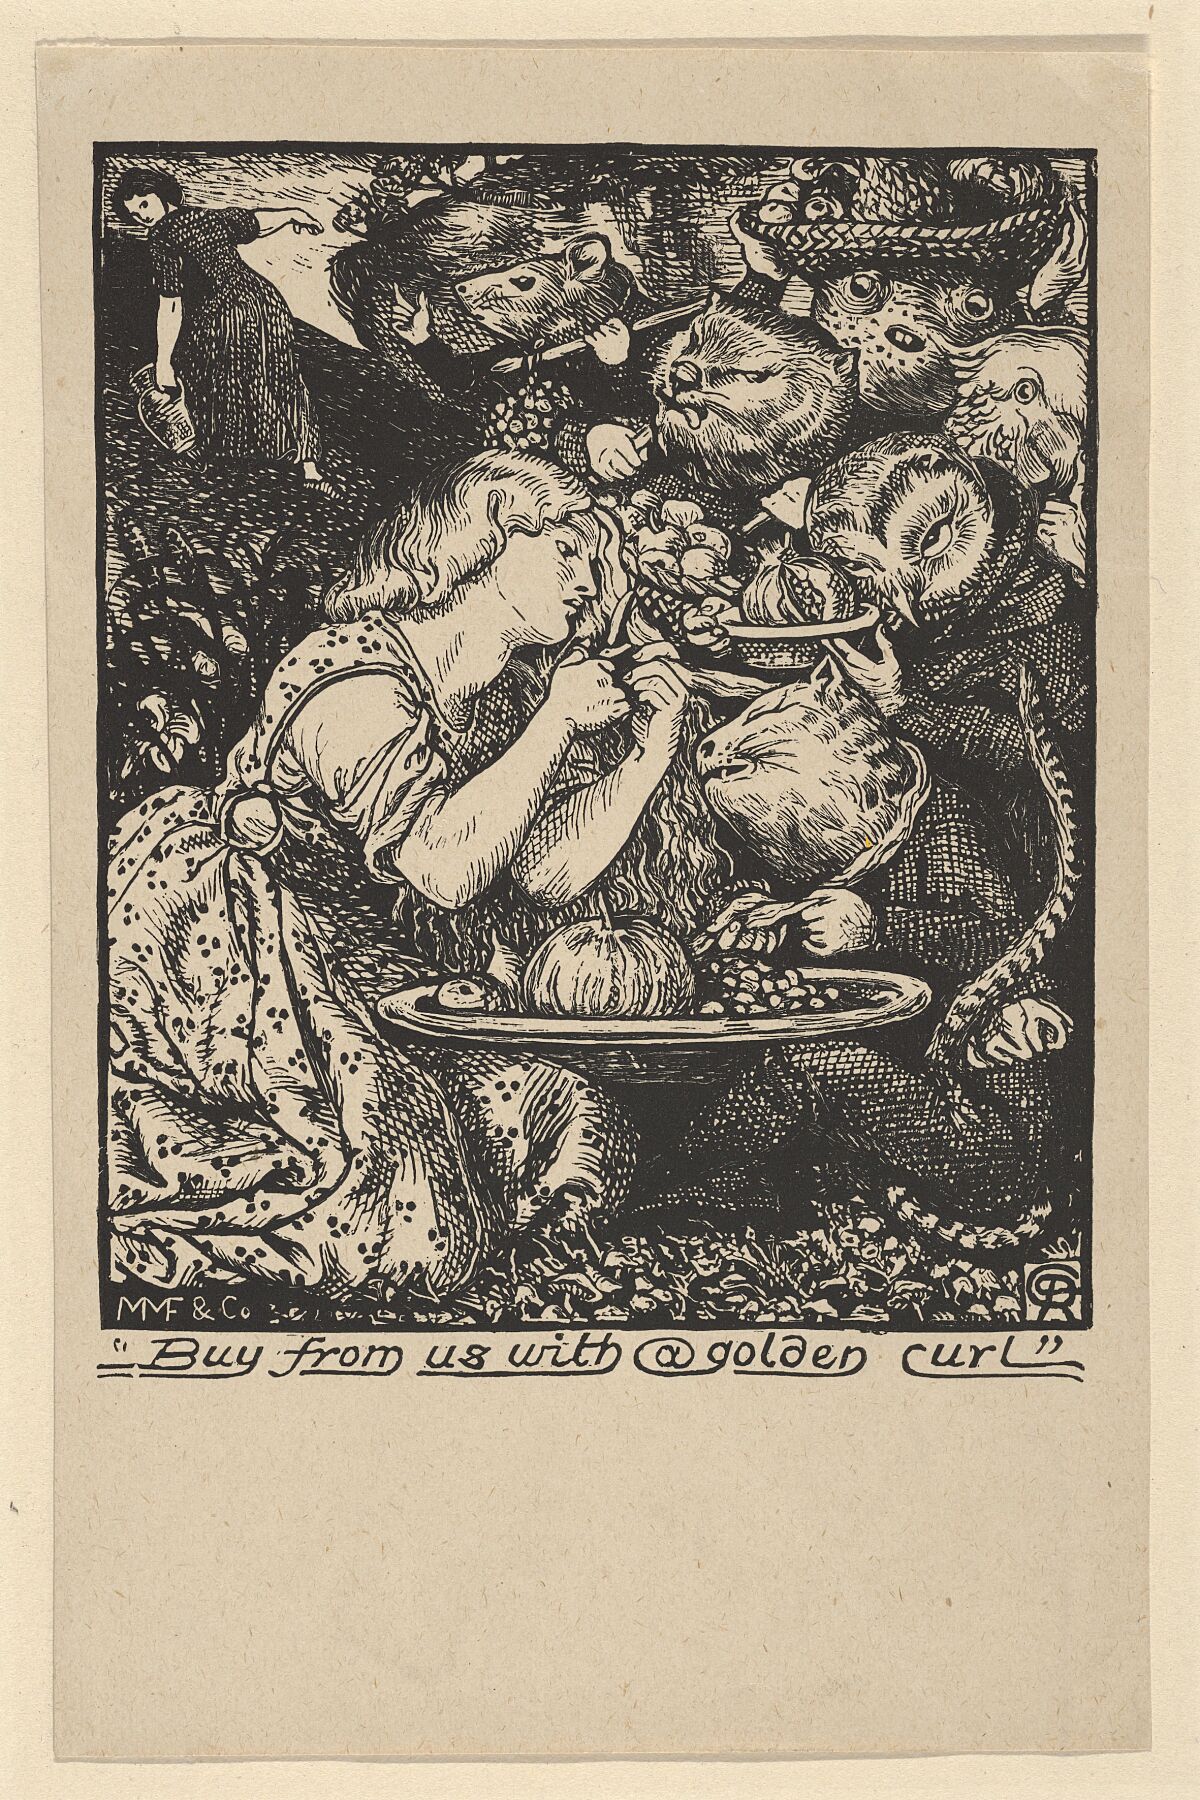 Buy from Us with a Golden Curl (frontispiece to 'Goblin Market and other Poems' by Christina Rossetti) 1862, After Dante Gabriel Rossetti